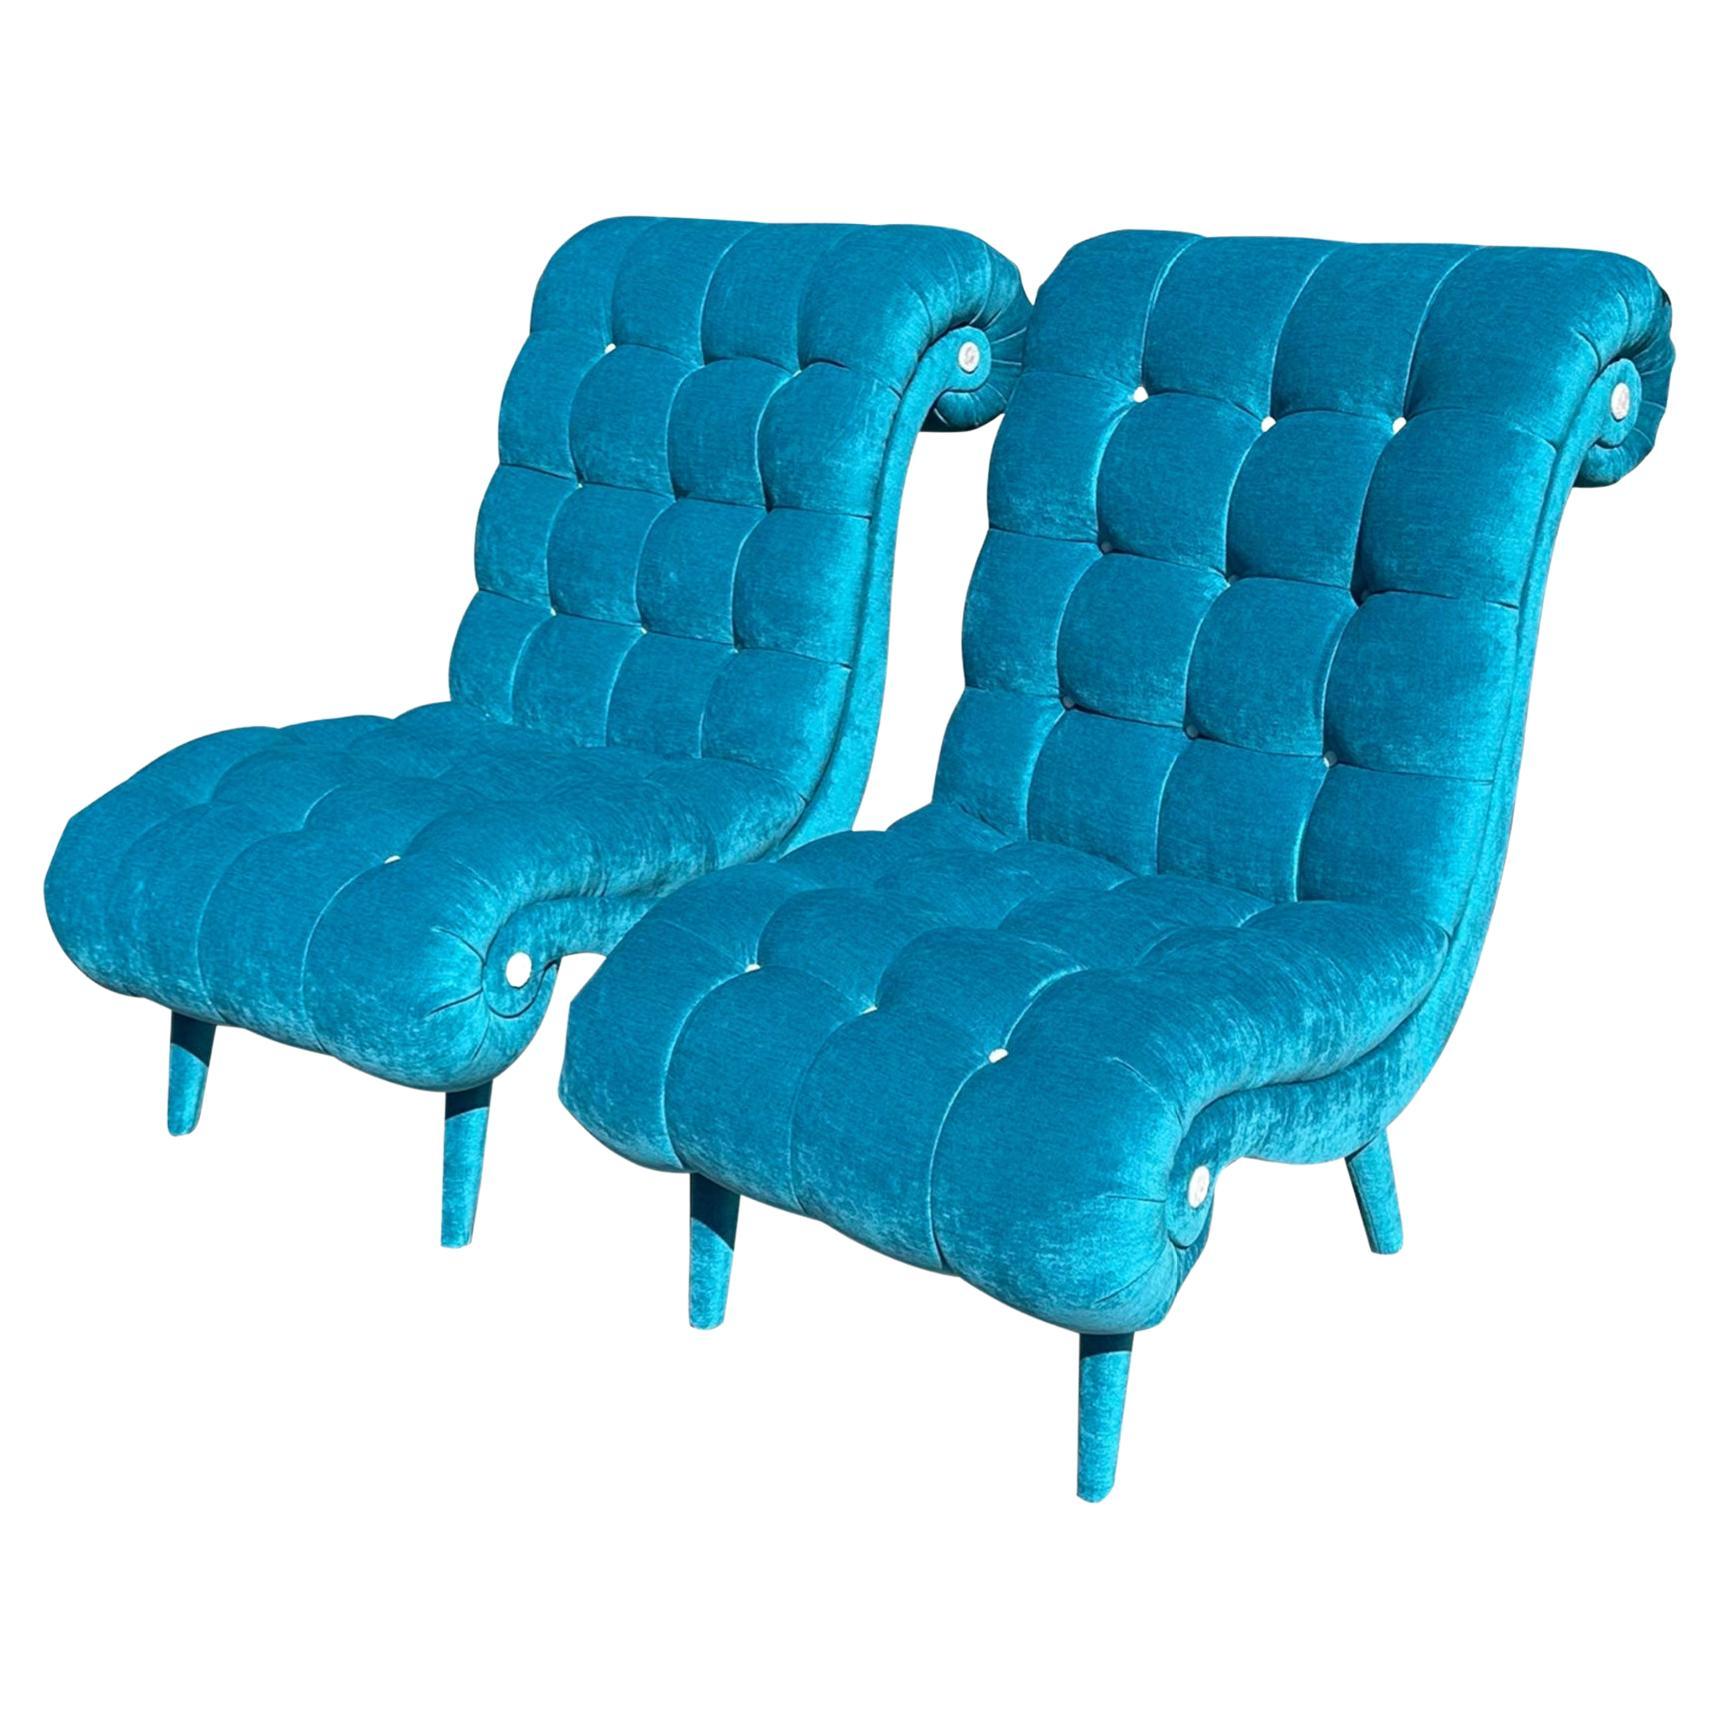 Pair of Mid Century Modern Tufted Turquoise Velvet Chairs For Sale